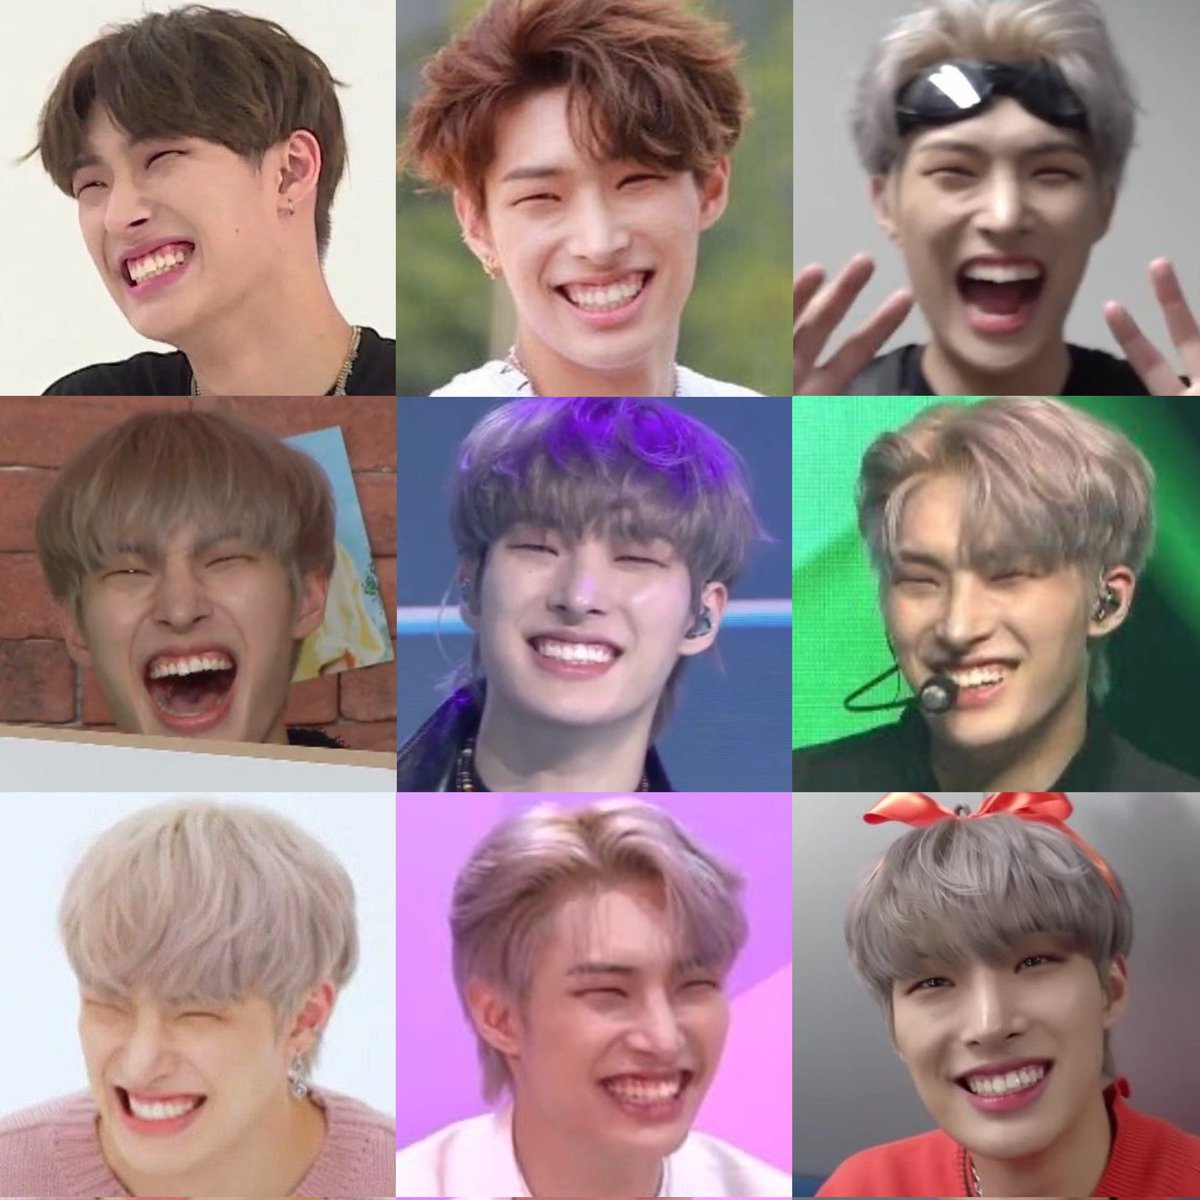 Mingi precious gummy smile for tl so you can have a good day💗